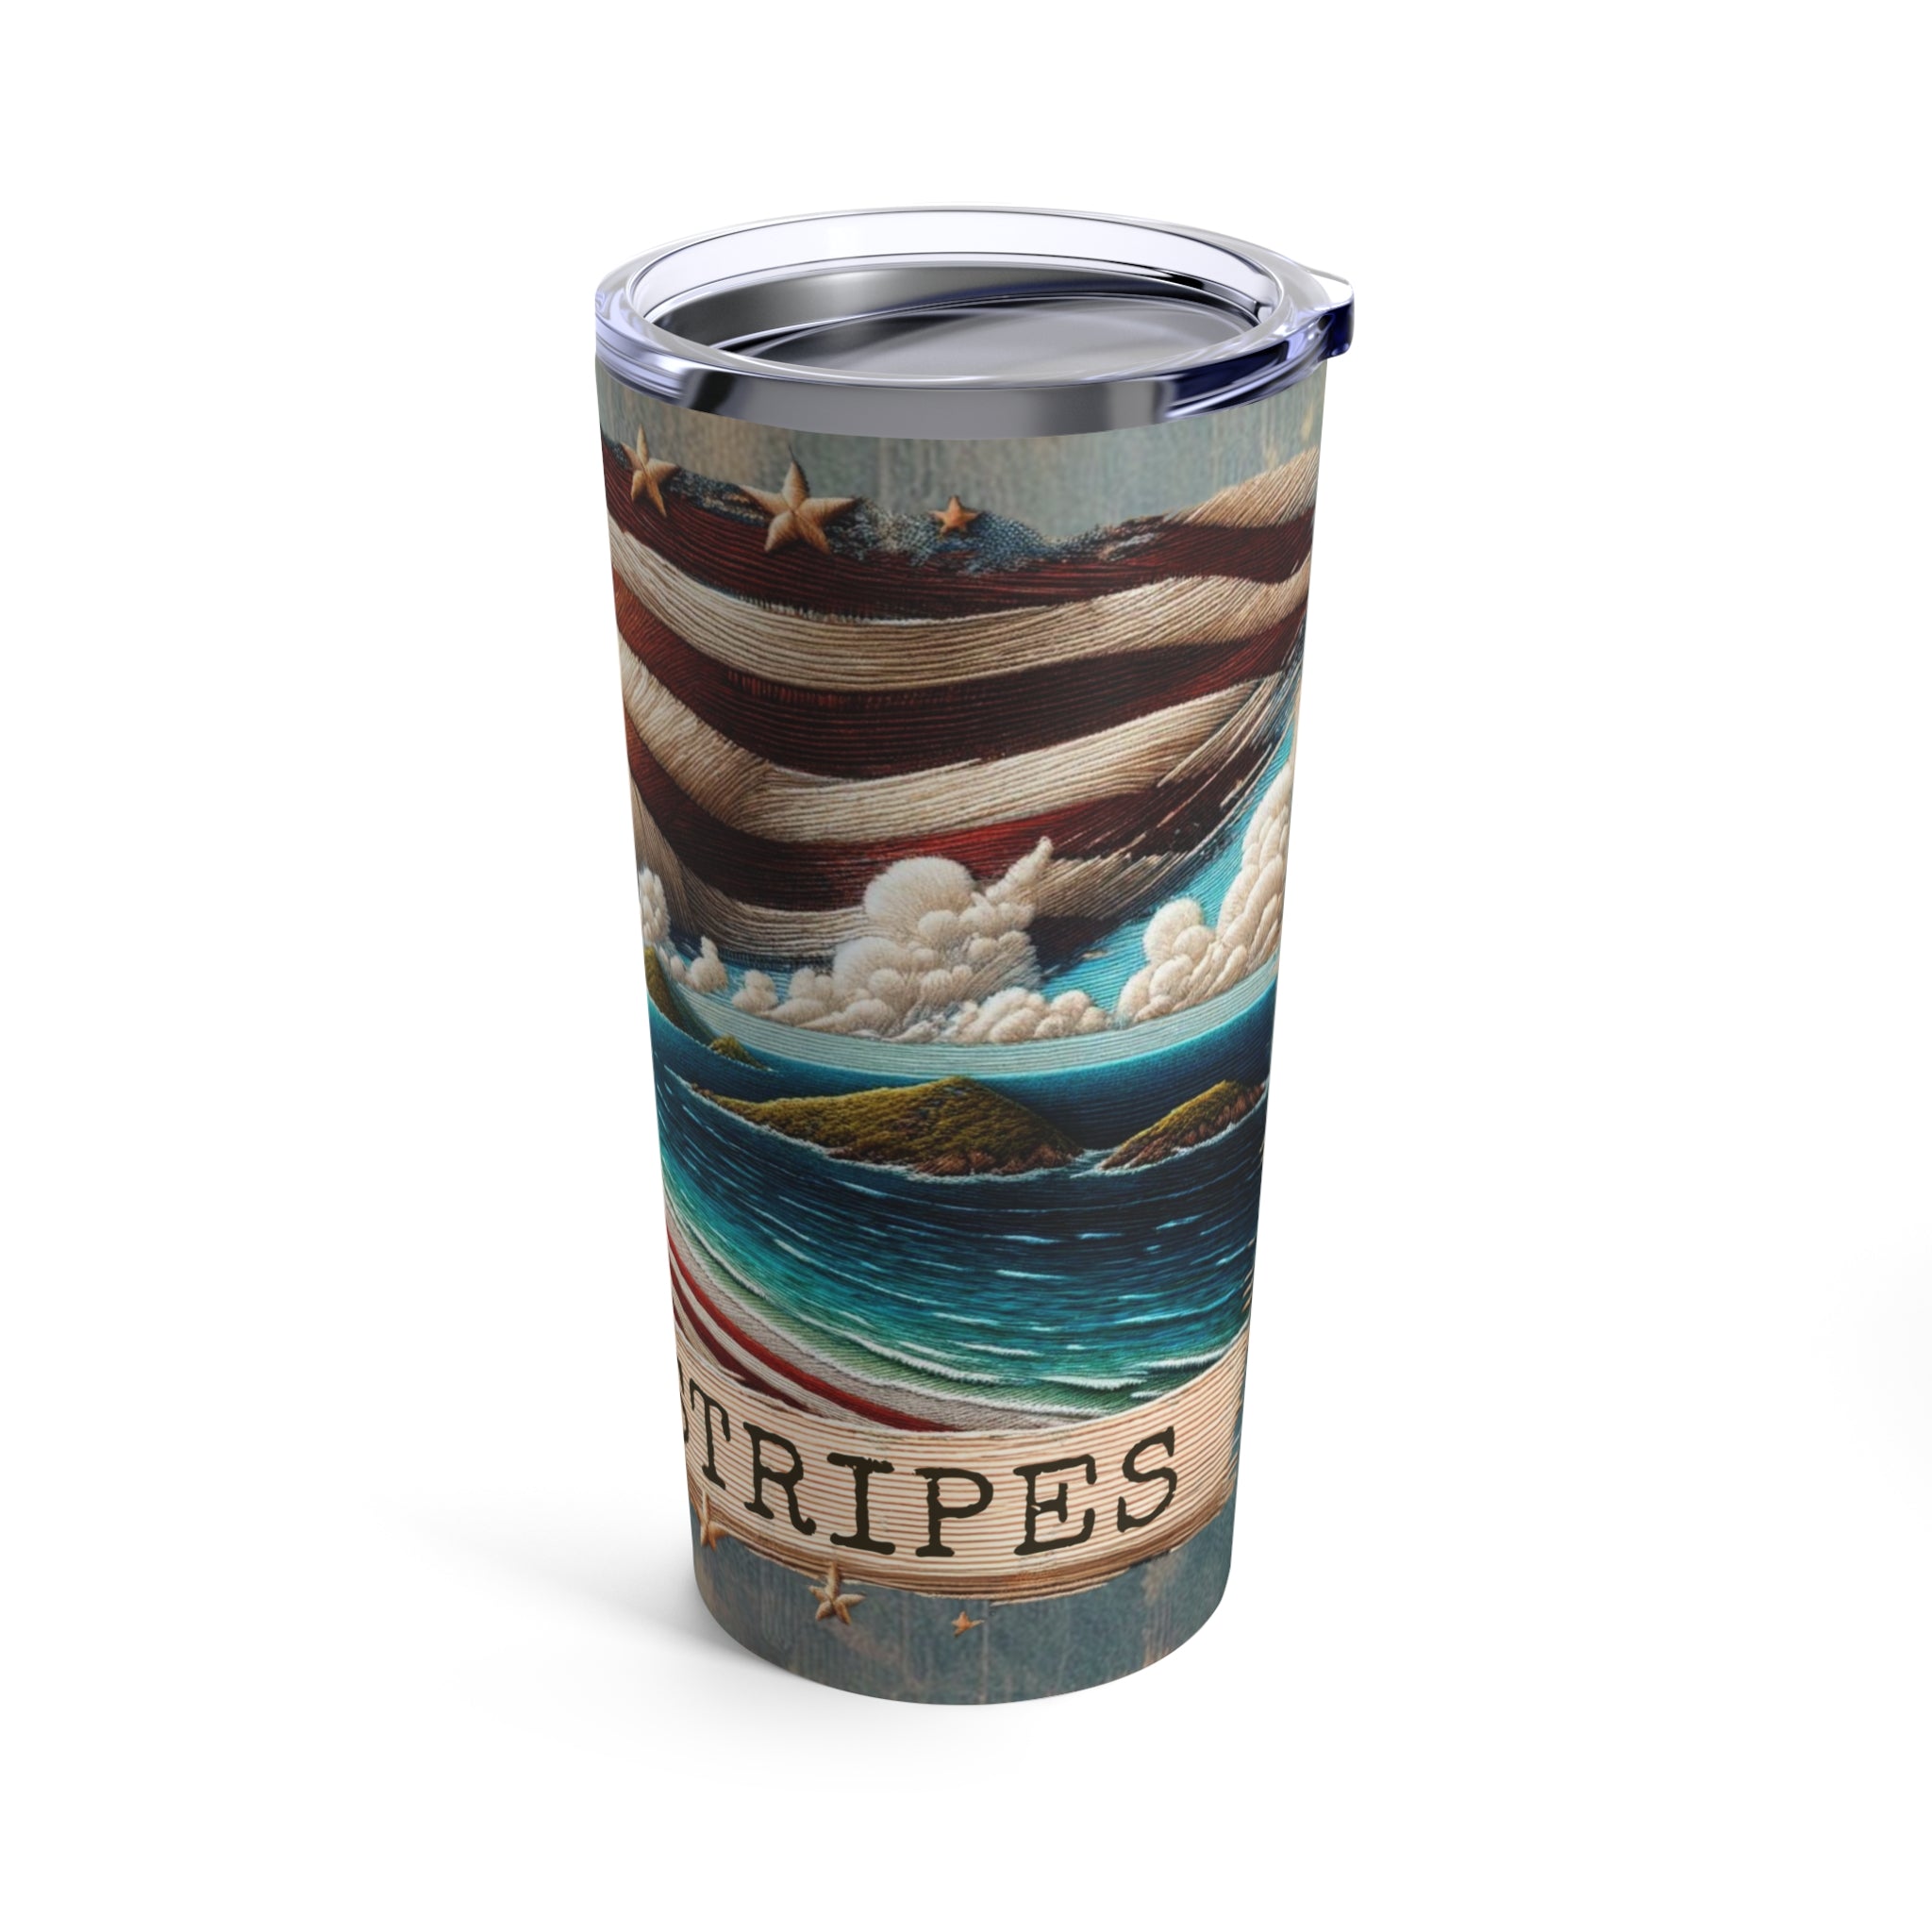 Experience Refreshment Everywhere with Our American Sand & Stripes Tumbler 20oz